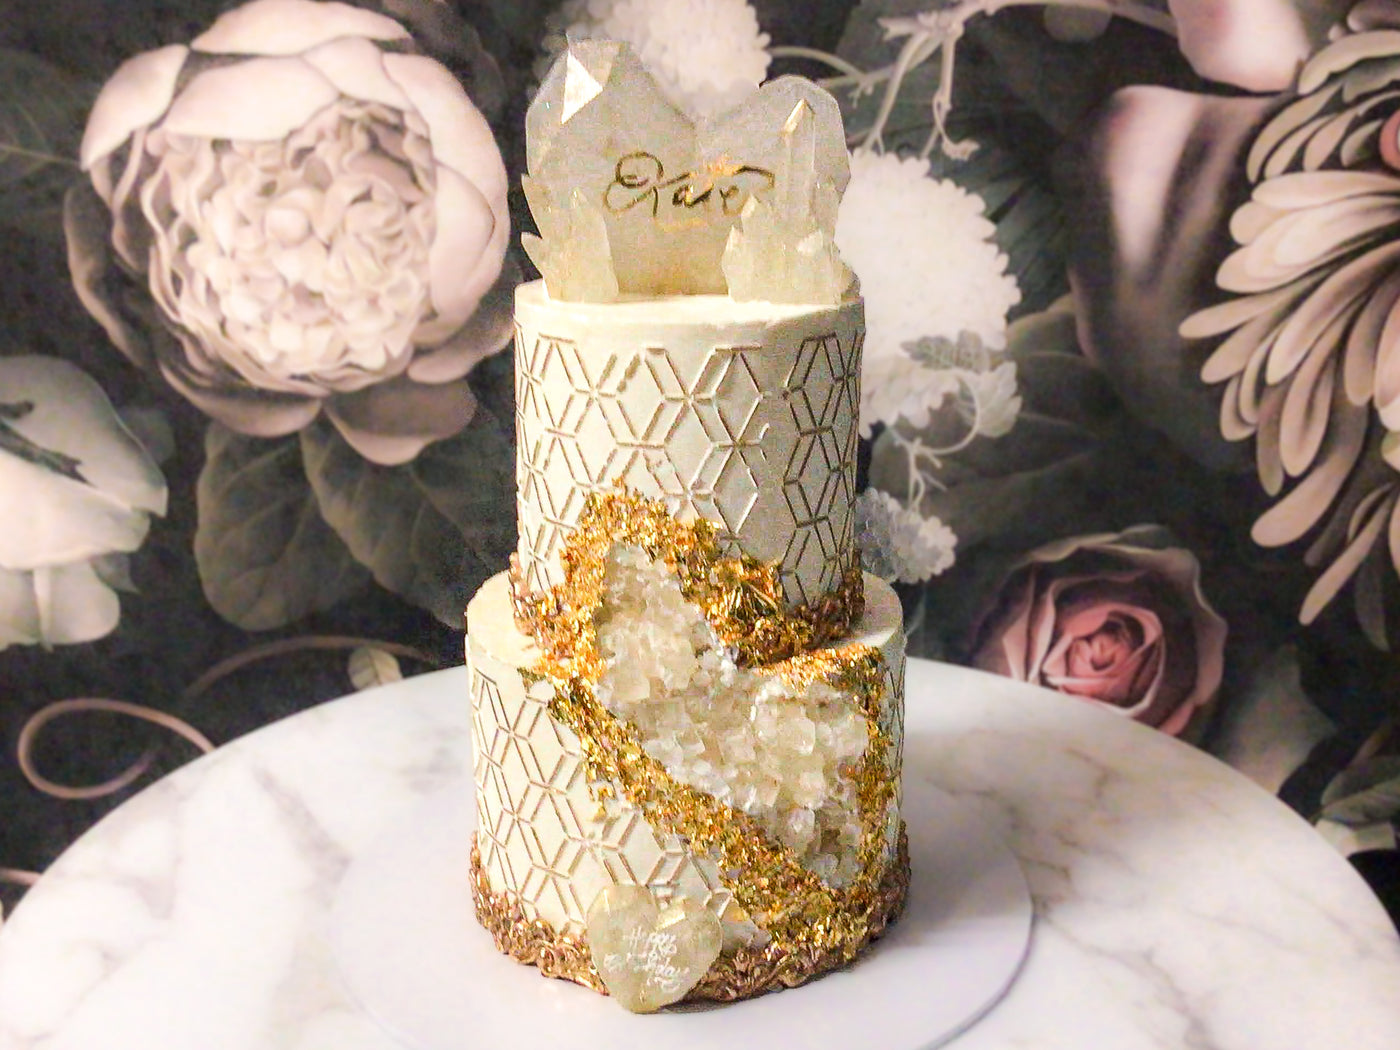 geode sugar crystals delicately covering a carved out piece to create a geode crystal illusion. Geodes are then outlined with 24 Carat gold leaf from India. Another later of sophistication is added to the cake with hand painted gold hexagon patterns around the cake. Last, this cake is embellished with isomalt sugar crystals and hearts, gold painted fondant scroll borders.